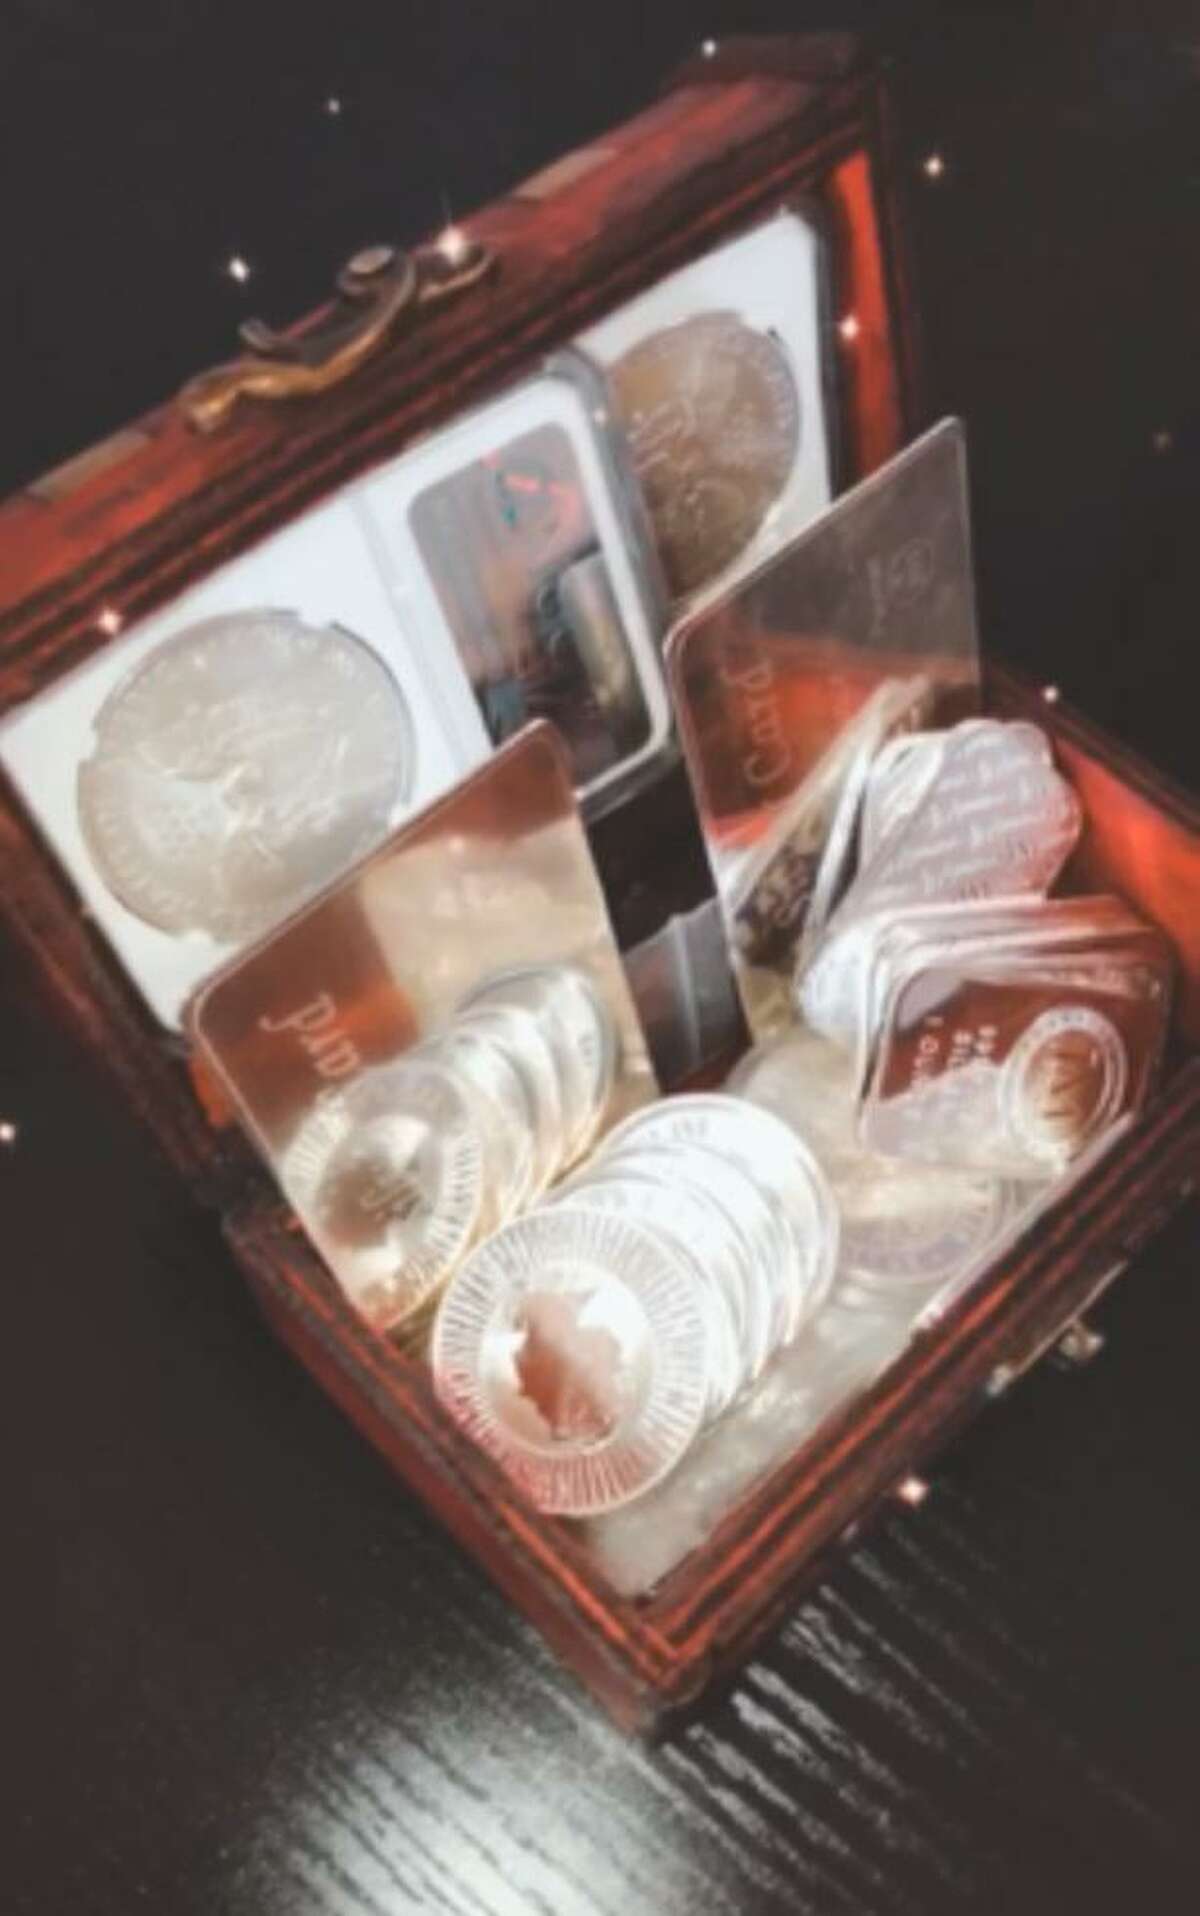 Shown is the treasure worth at least $600 which contains over 19 ounces of silver and 40 Sacagawea coins.